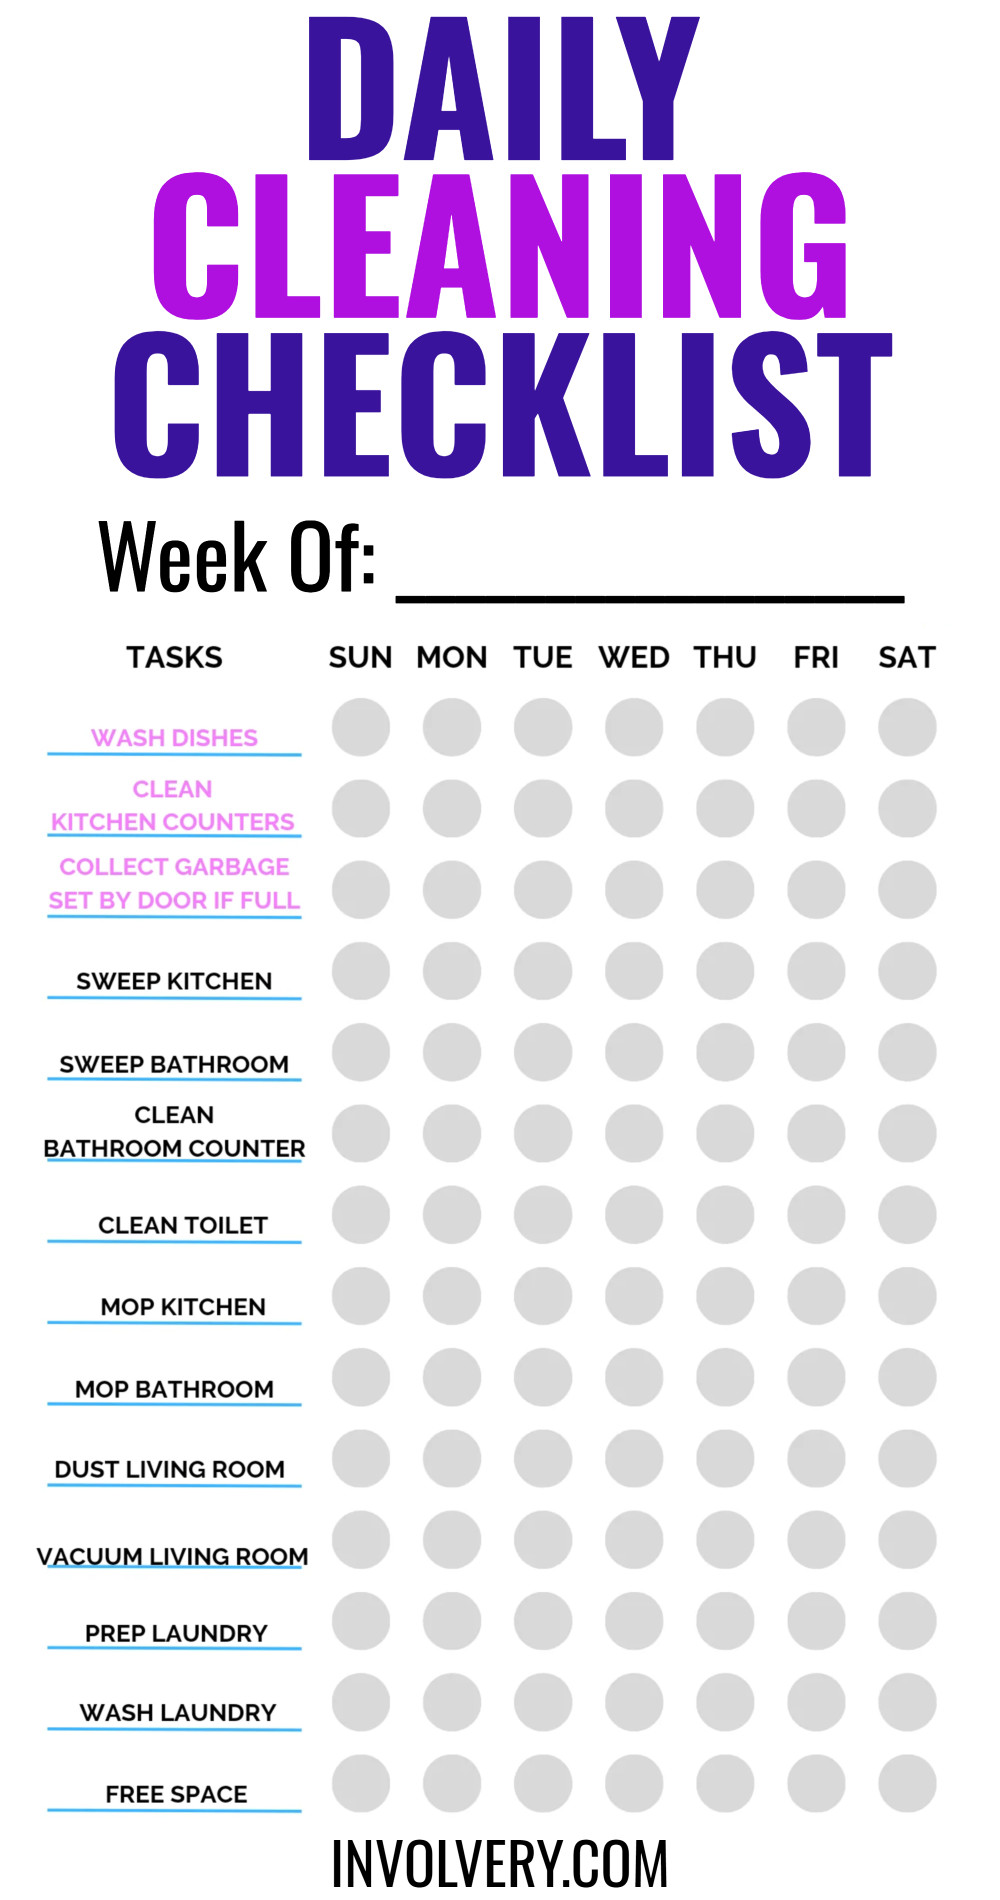 Daily Cleaning Checklist For Weekly Housekeeping Chores